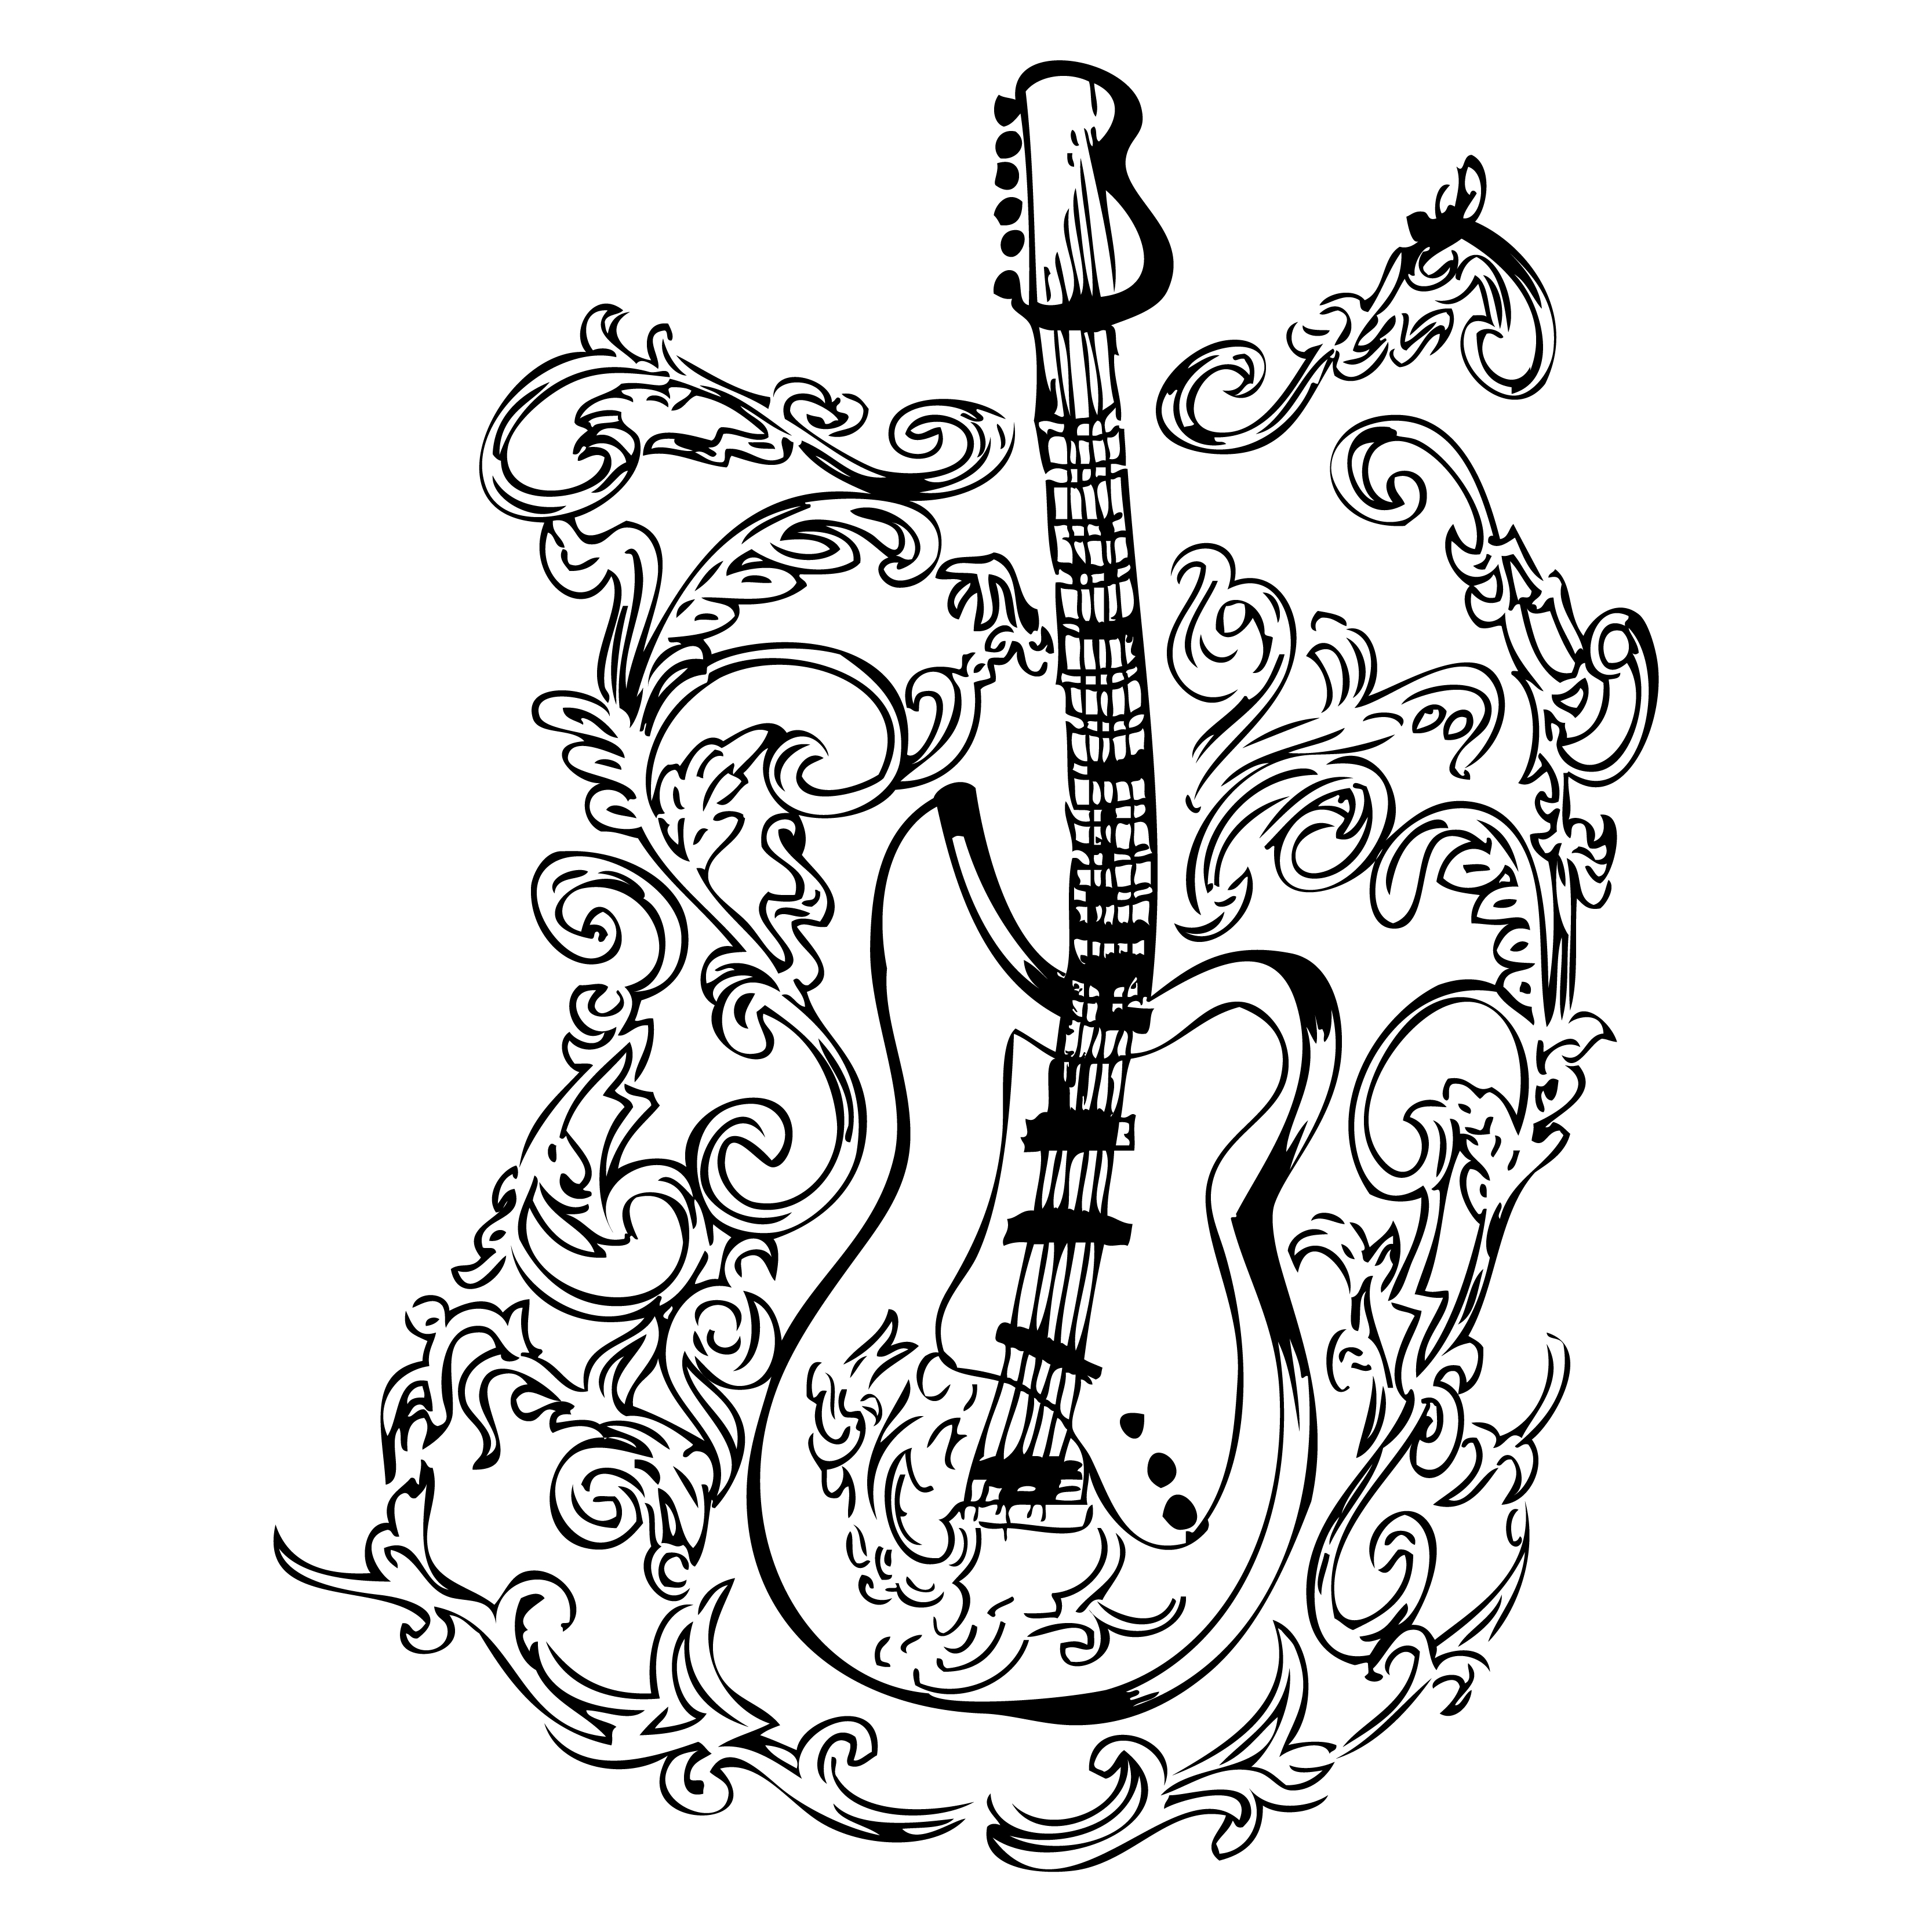 How to draw a guitar? - Step by Step Drawing Guide for Kids